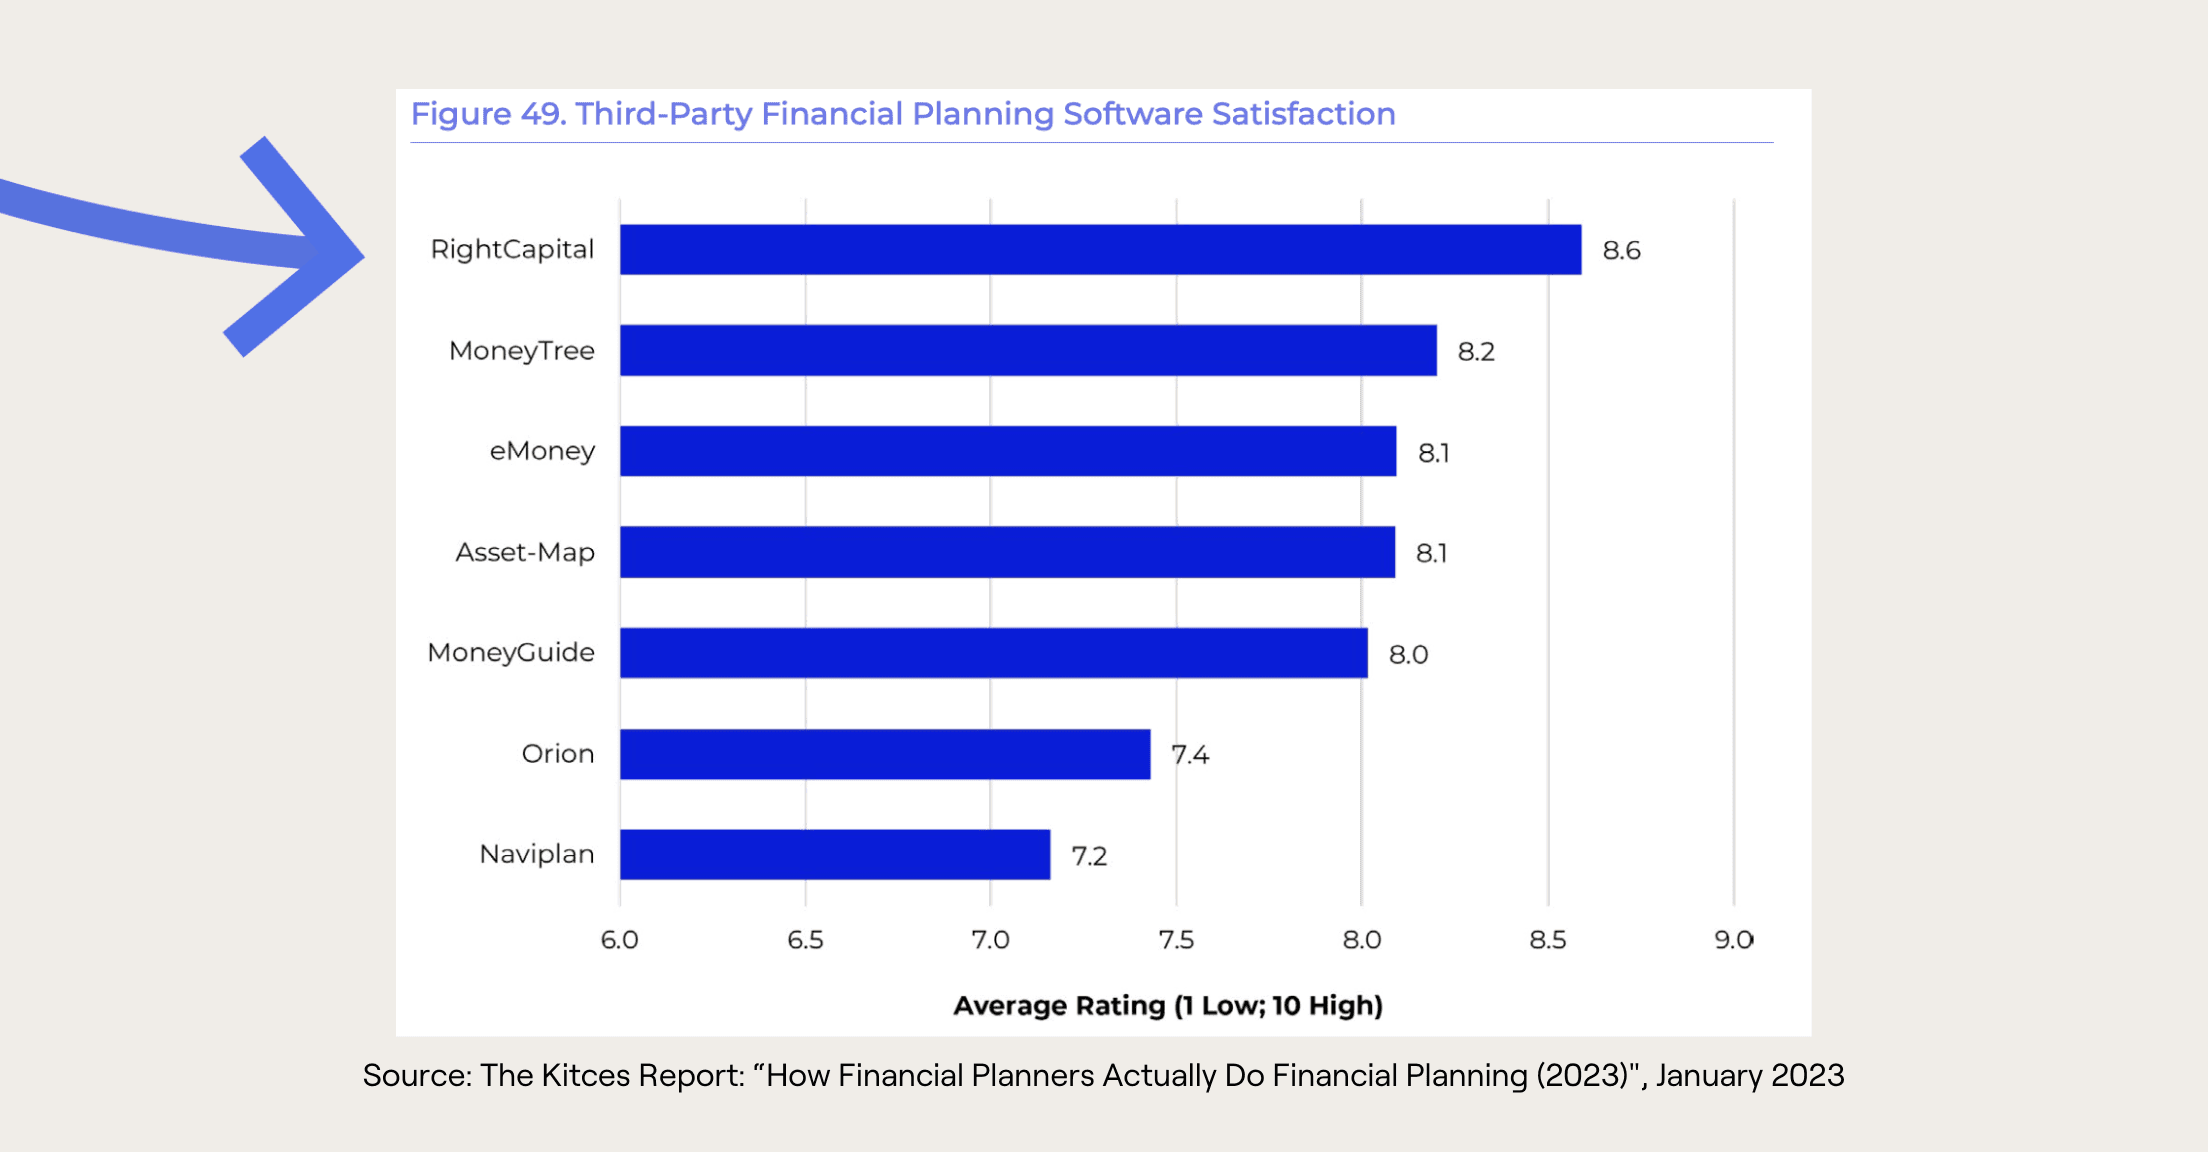 Chart from Kitces 2023 report showing RightCapital's satisfaction rate from advisors as 8.6/10, the highest of all planning software